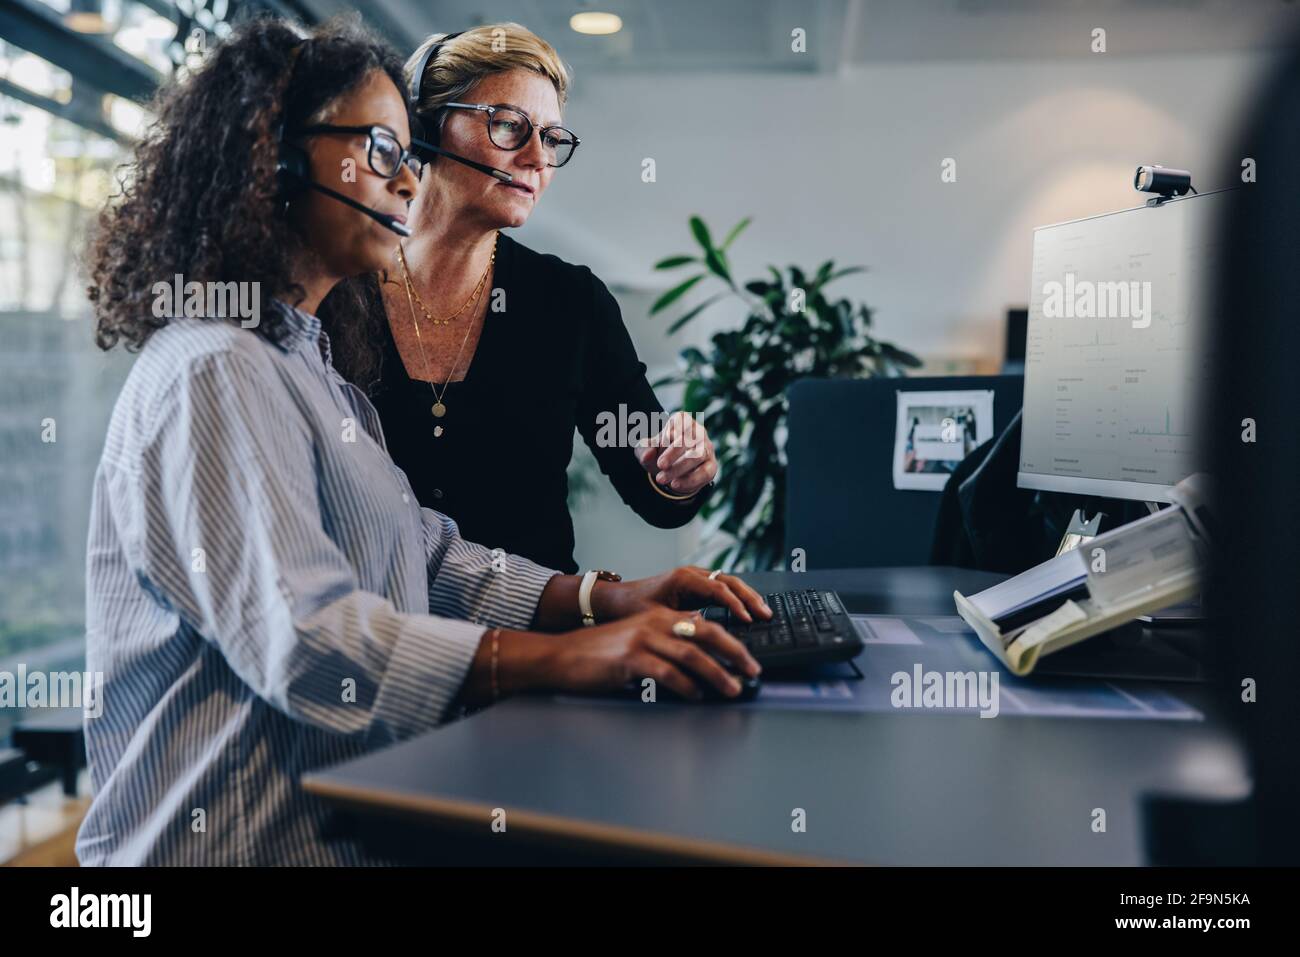 Two female coworkers cooperating while using computer and working in the office. businesswomen working together on a project in office. Stock Photo